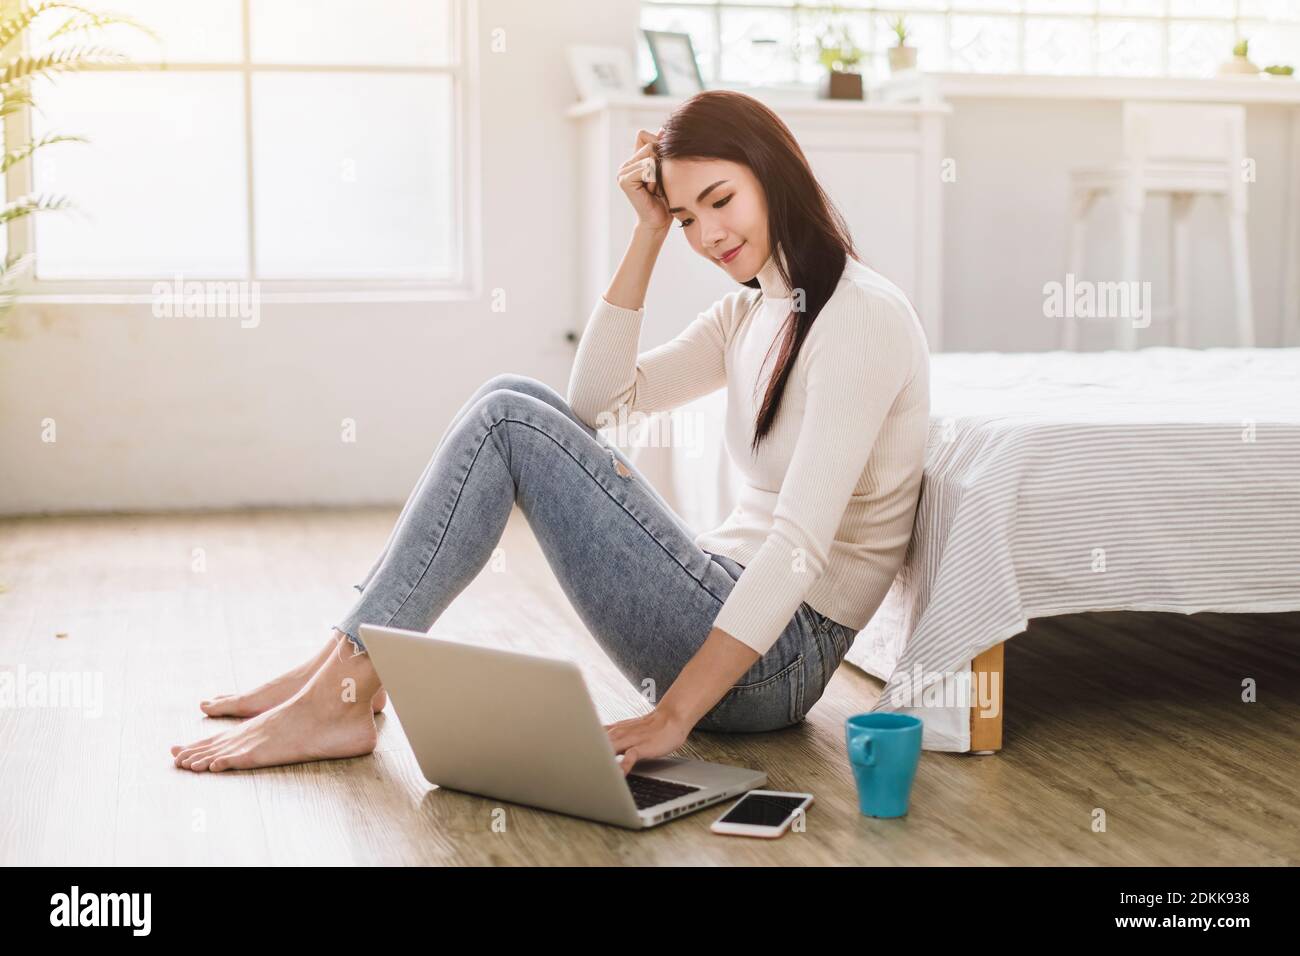 Beautiful young smiling woman working on laptop and drinking coffee at home Stock Photo